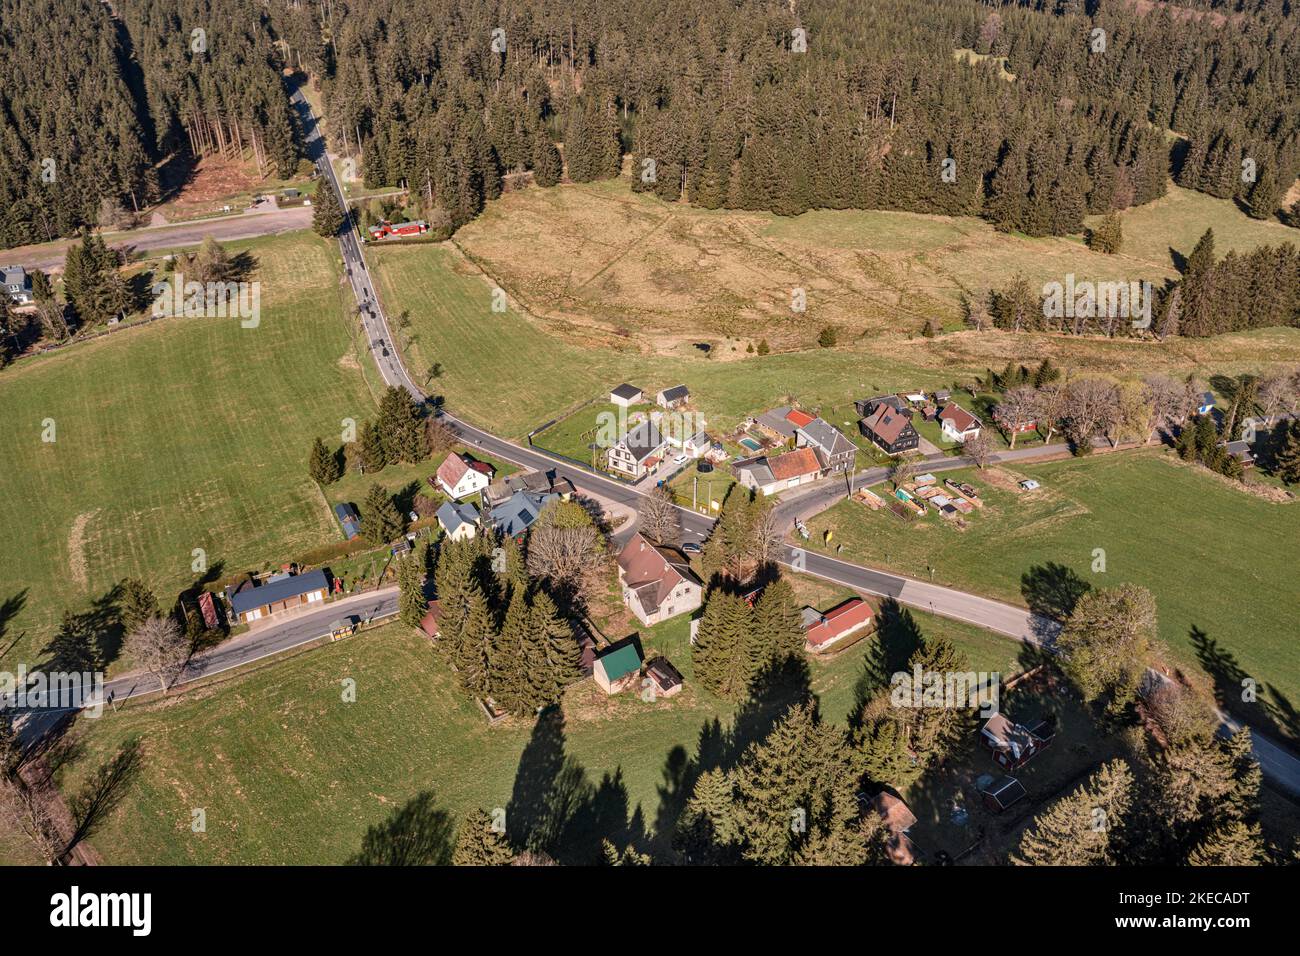 Germany, Thuringia, Frauenwald, Allzunah, village, forest, clearing, roads, Rennsteig (road in the middle of the picture), overview, oblique view, aerial view Stock Photo